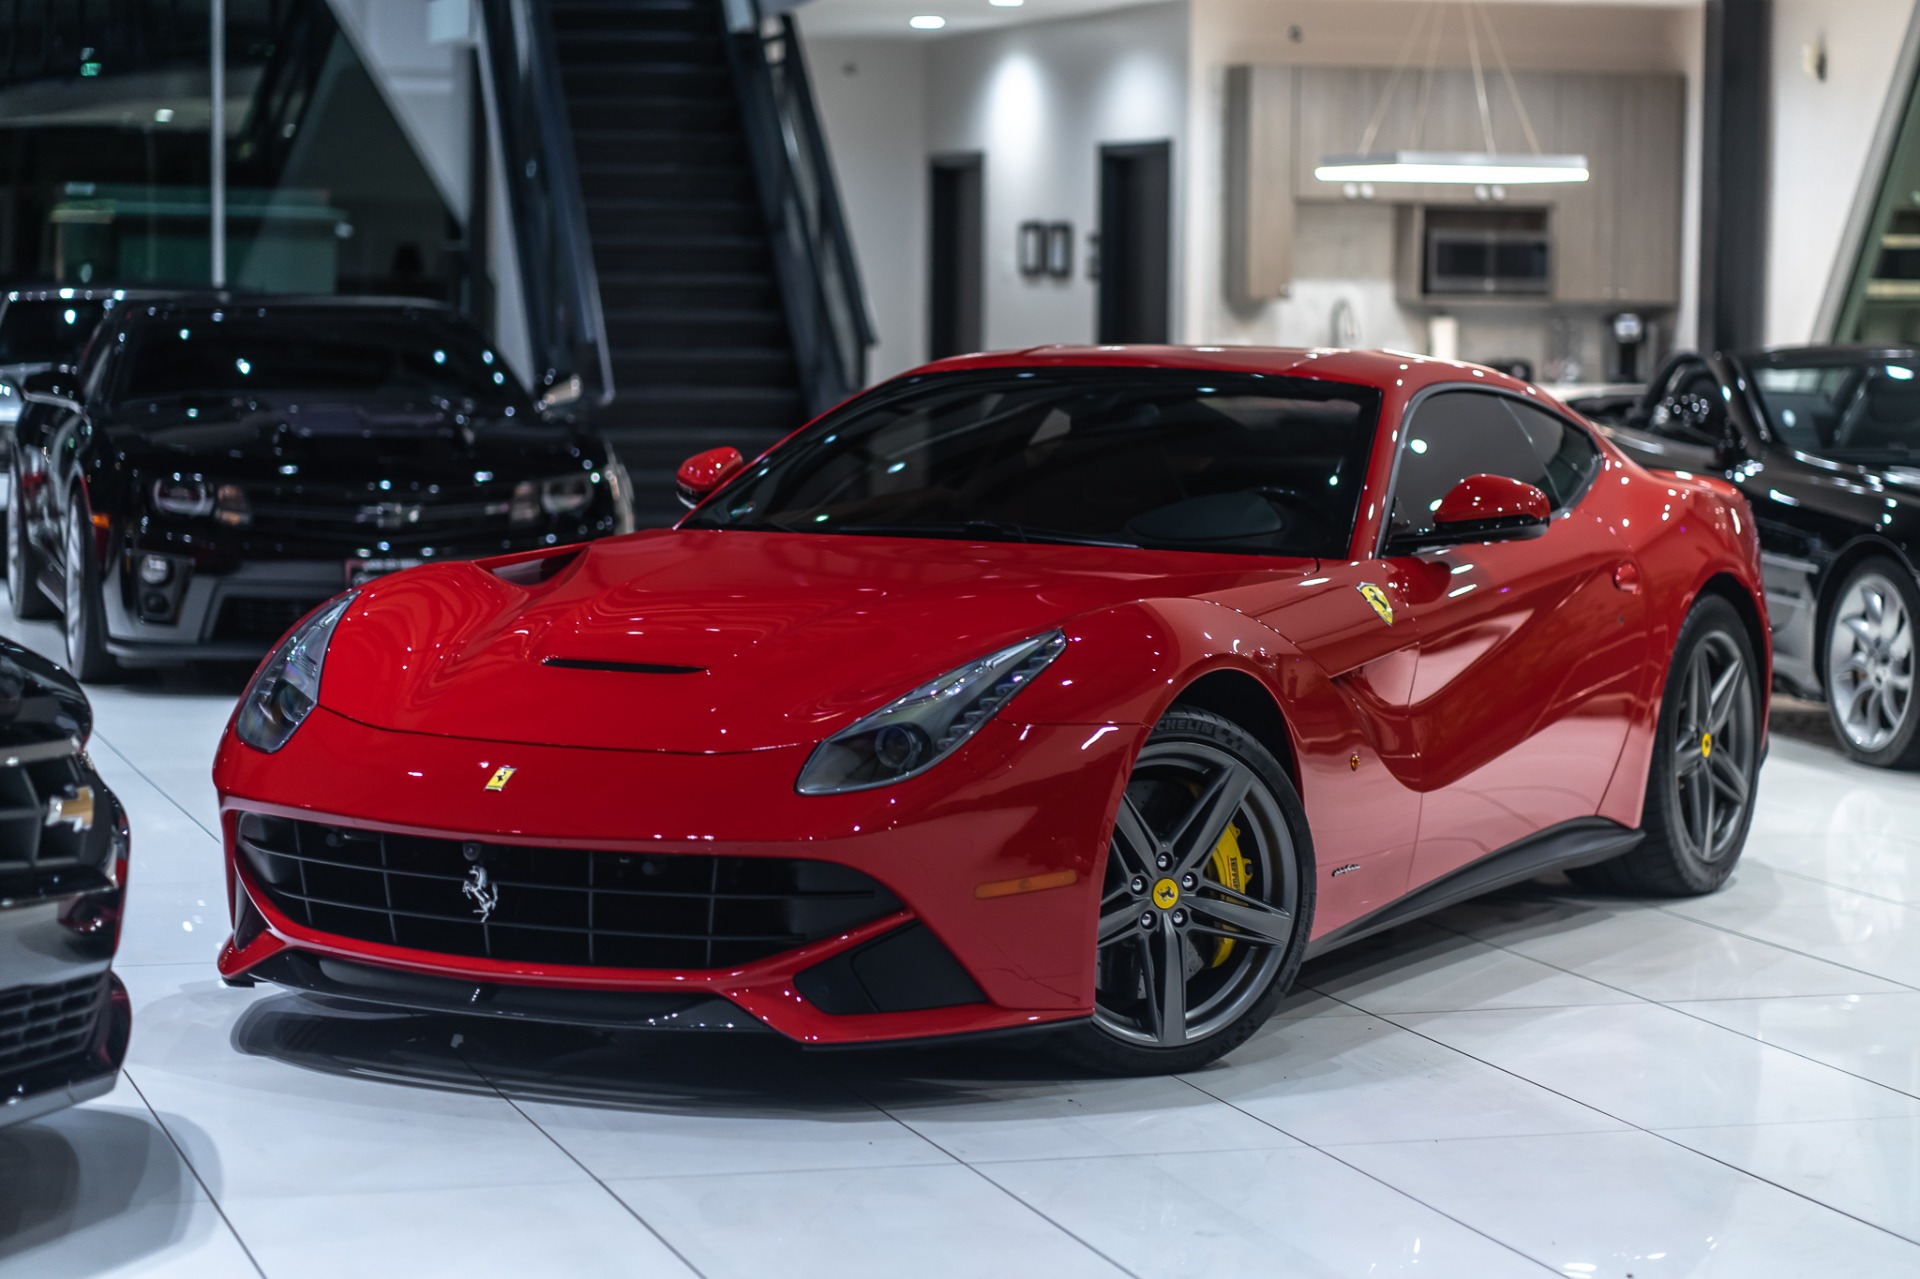 Low-Mileage Ferrari F12 Berlinetta Winks At Potential Buyers With